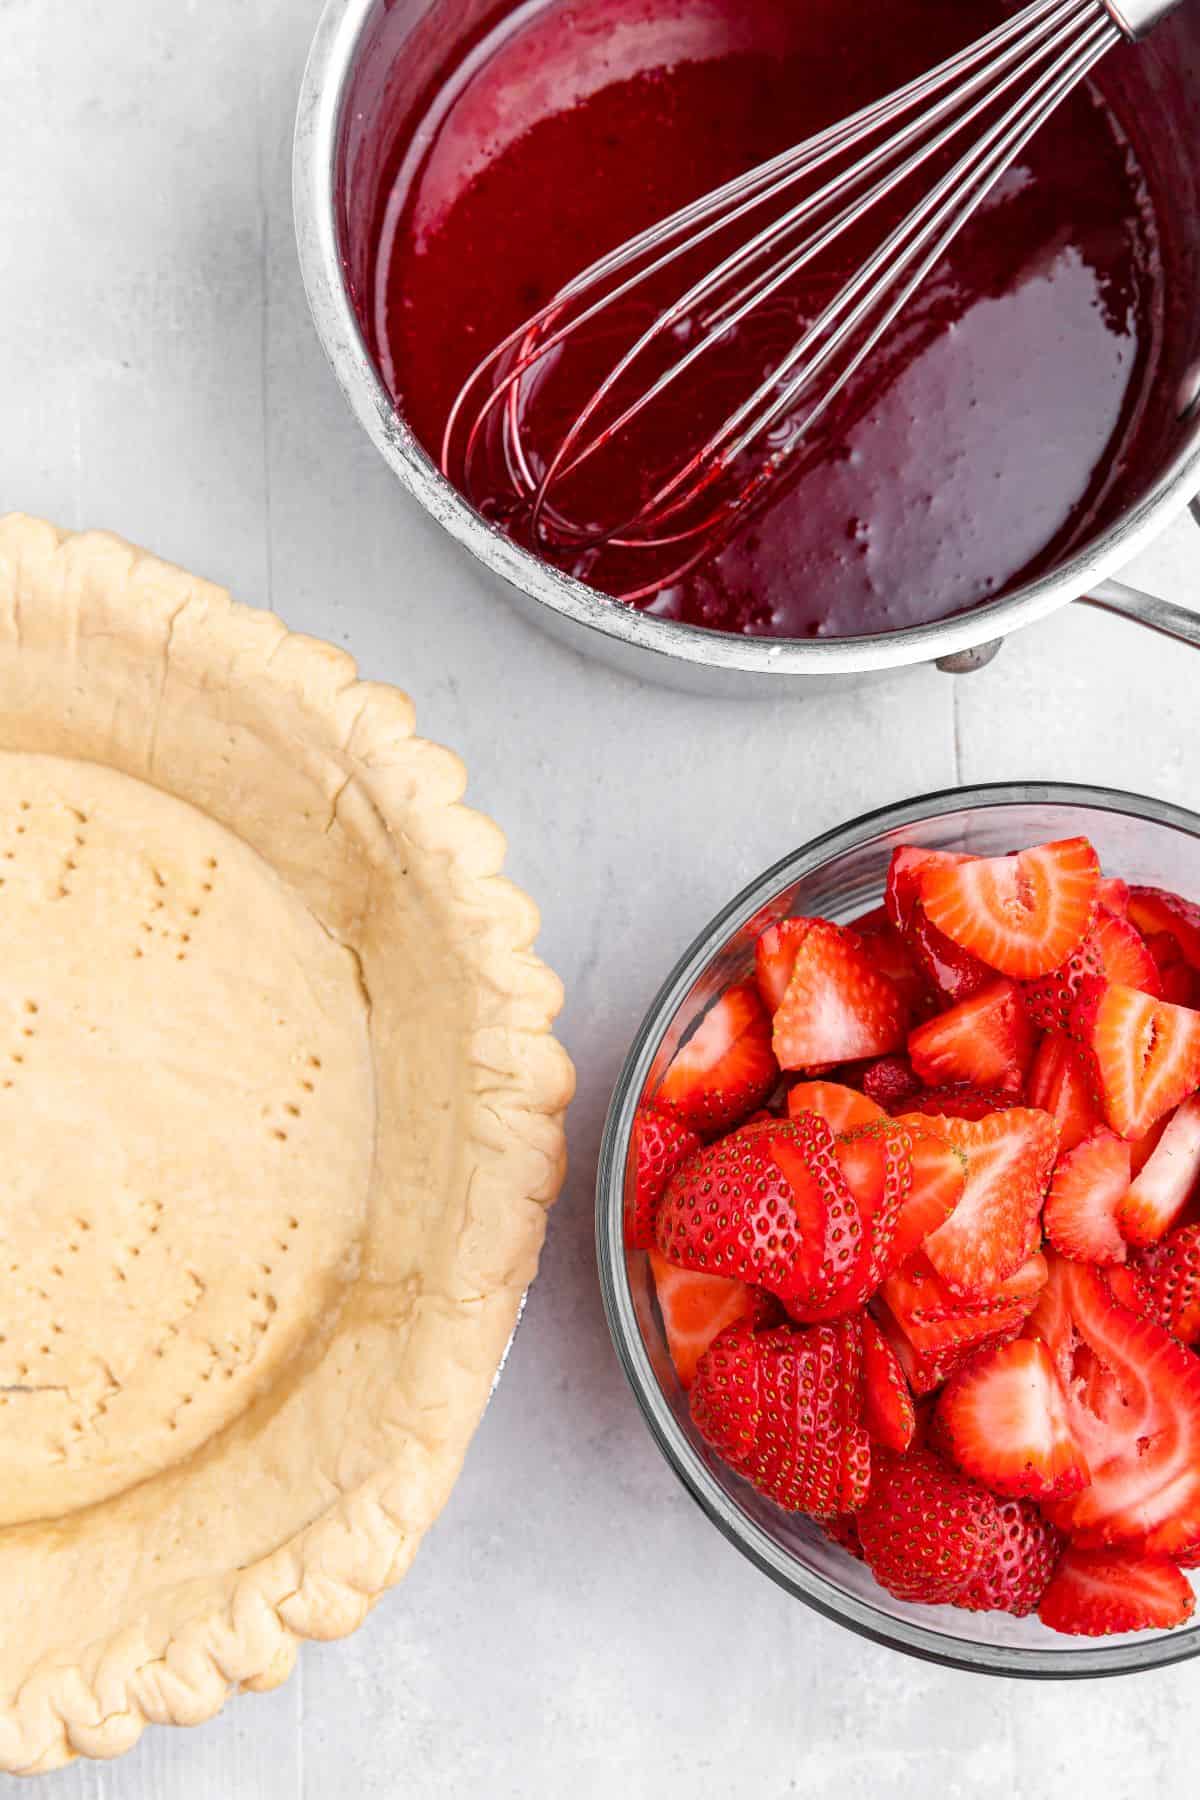 A pre-baked homemade pie crust, a bowl of fresh sliced strawberries, and a saucepan of warm strawberry gelatin on a work surface.